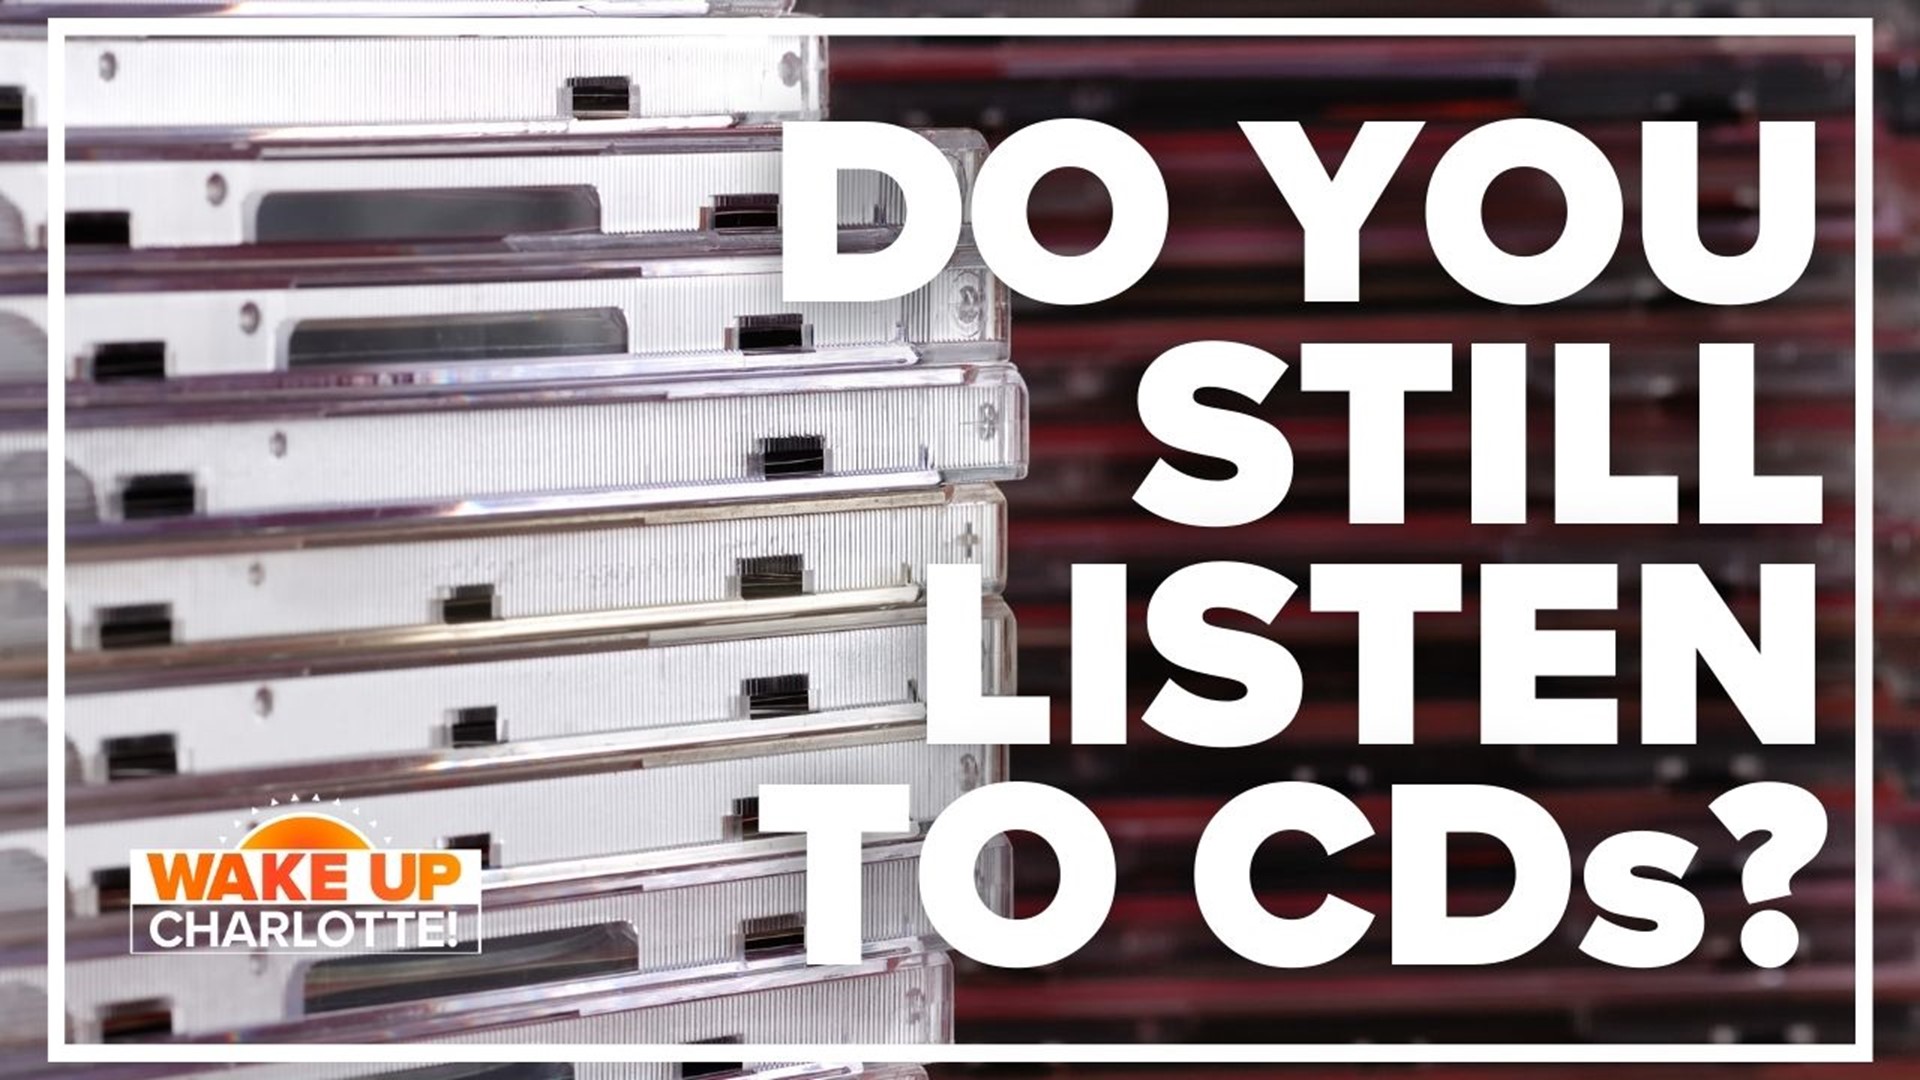 For the first time in nearly 20 years, CD sales went up in 2021. So are they cool again?